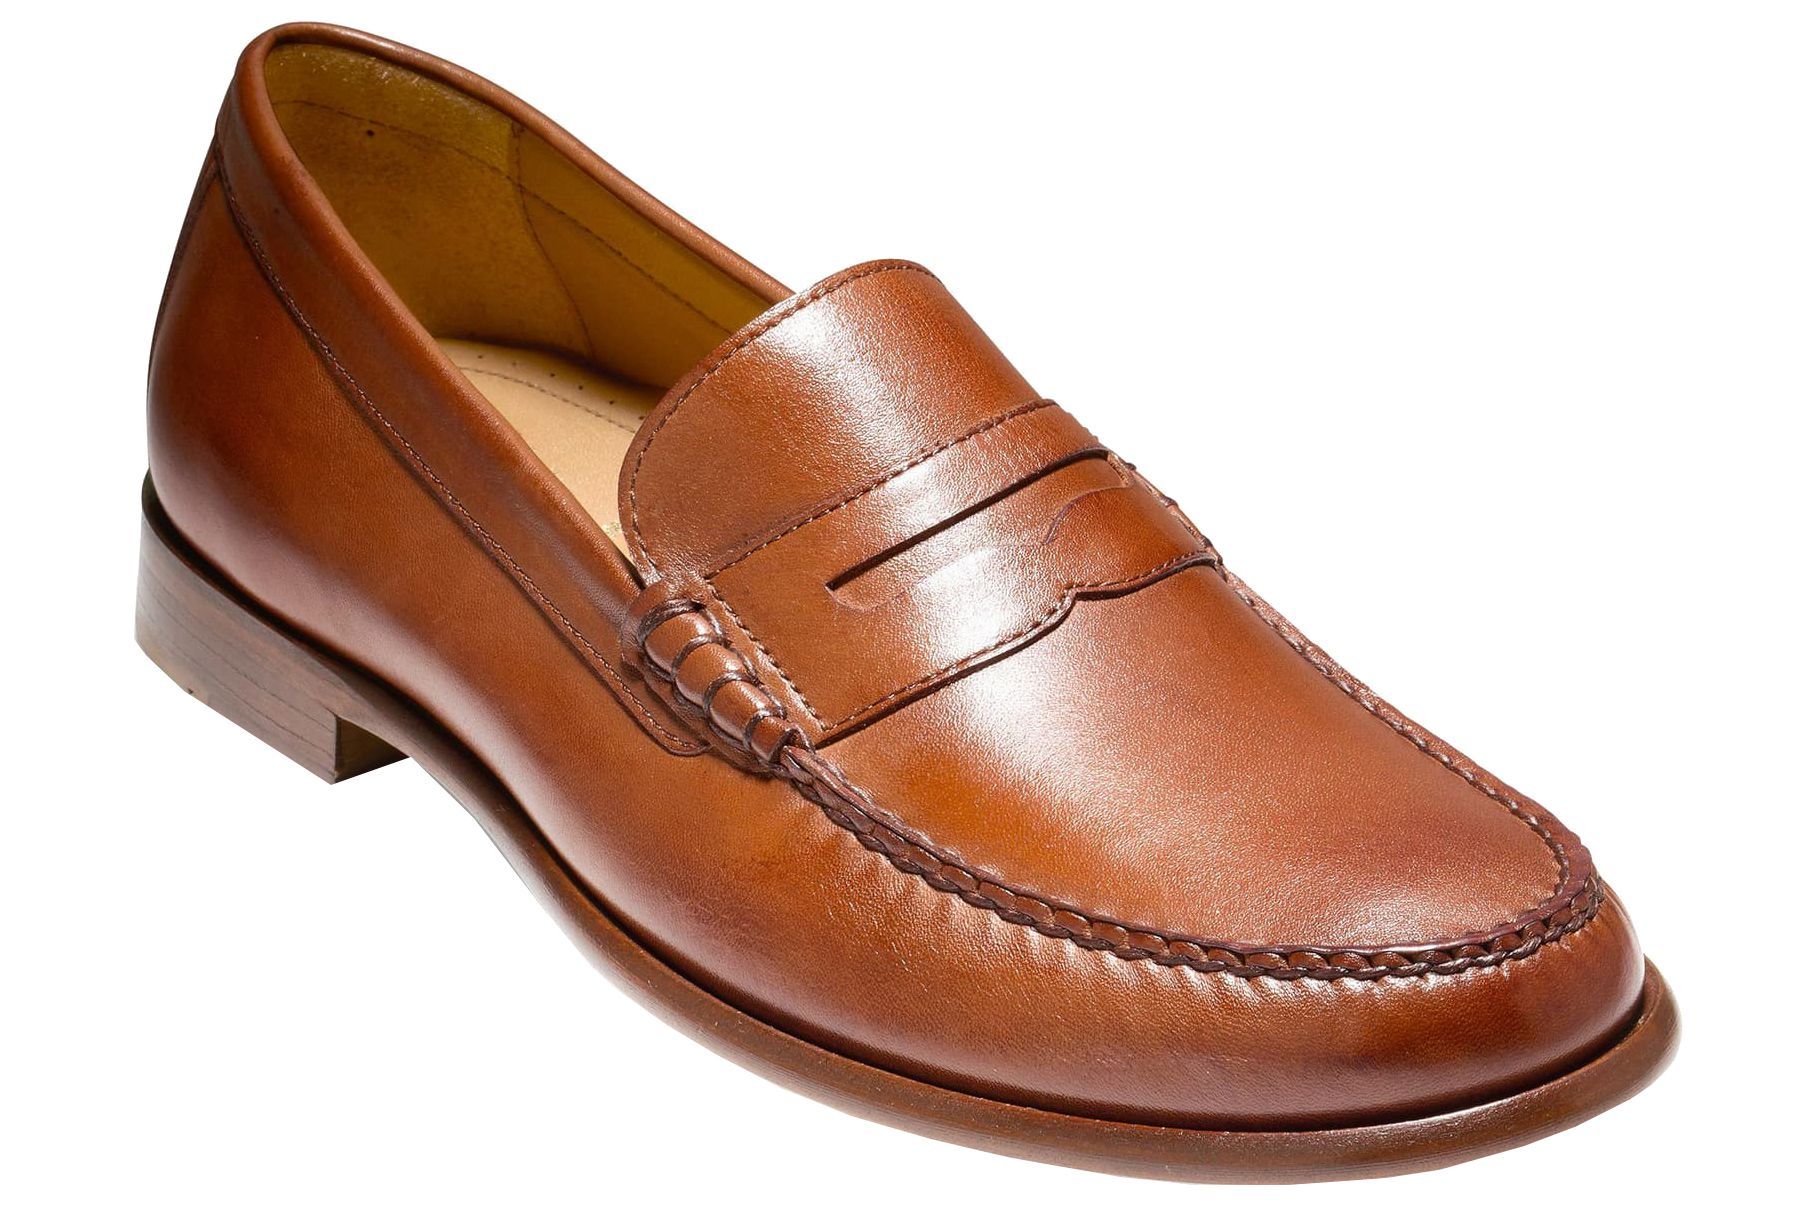 business casual slip on shoes